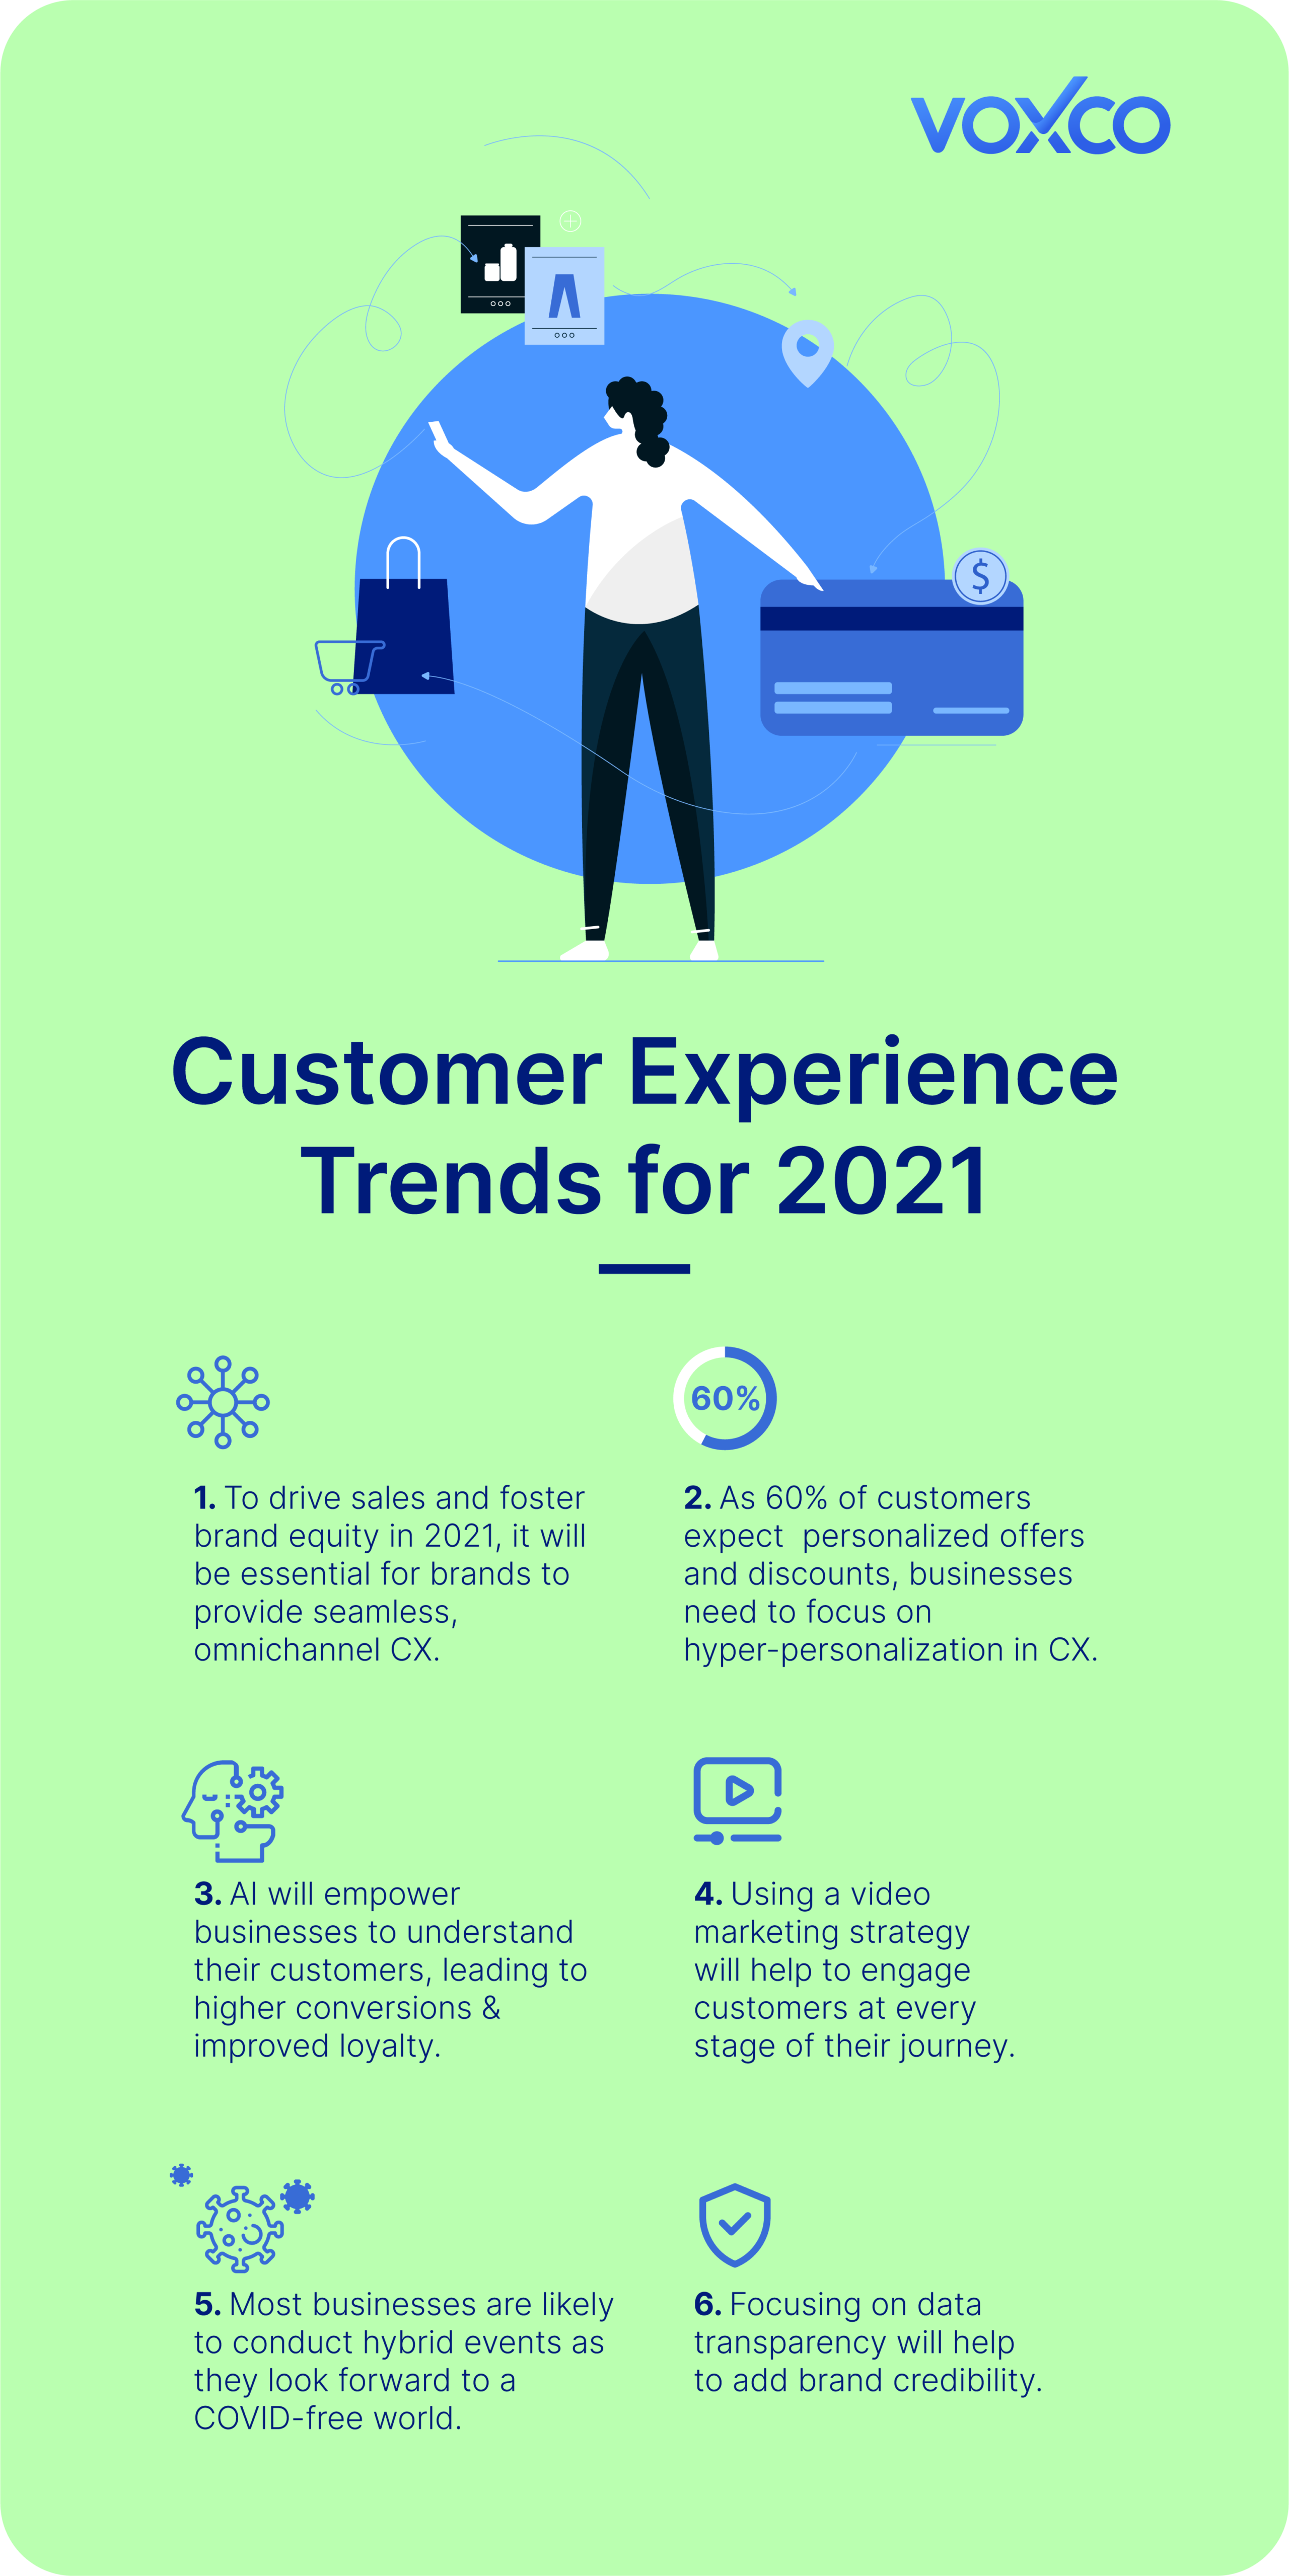 Customer Experience Trends to Watch out For in 2021 05 1 1 2 2 1